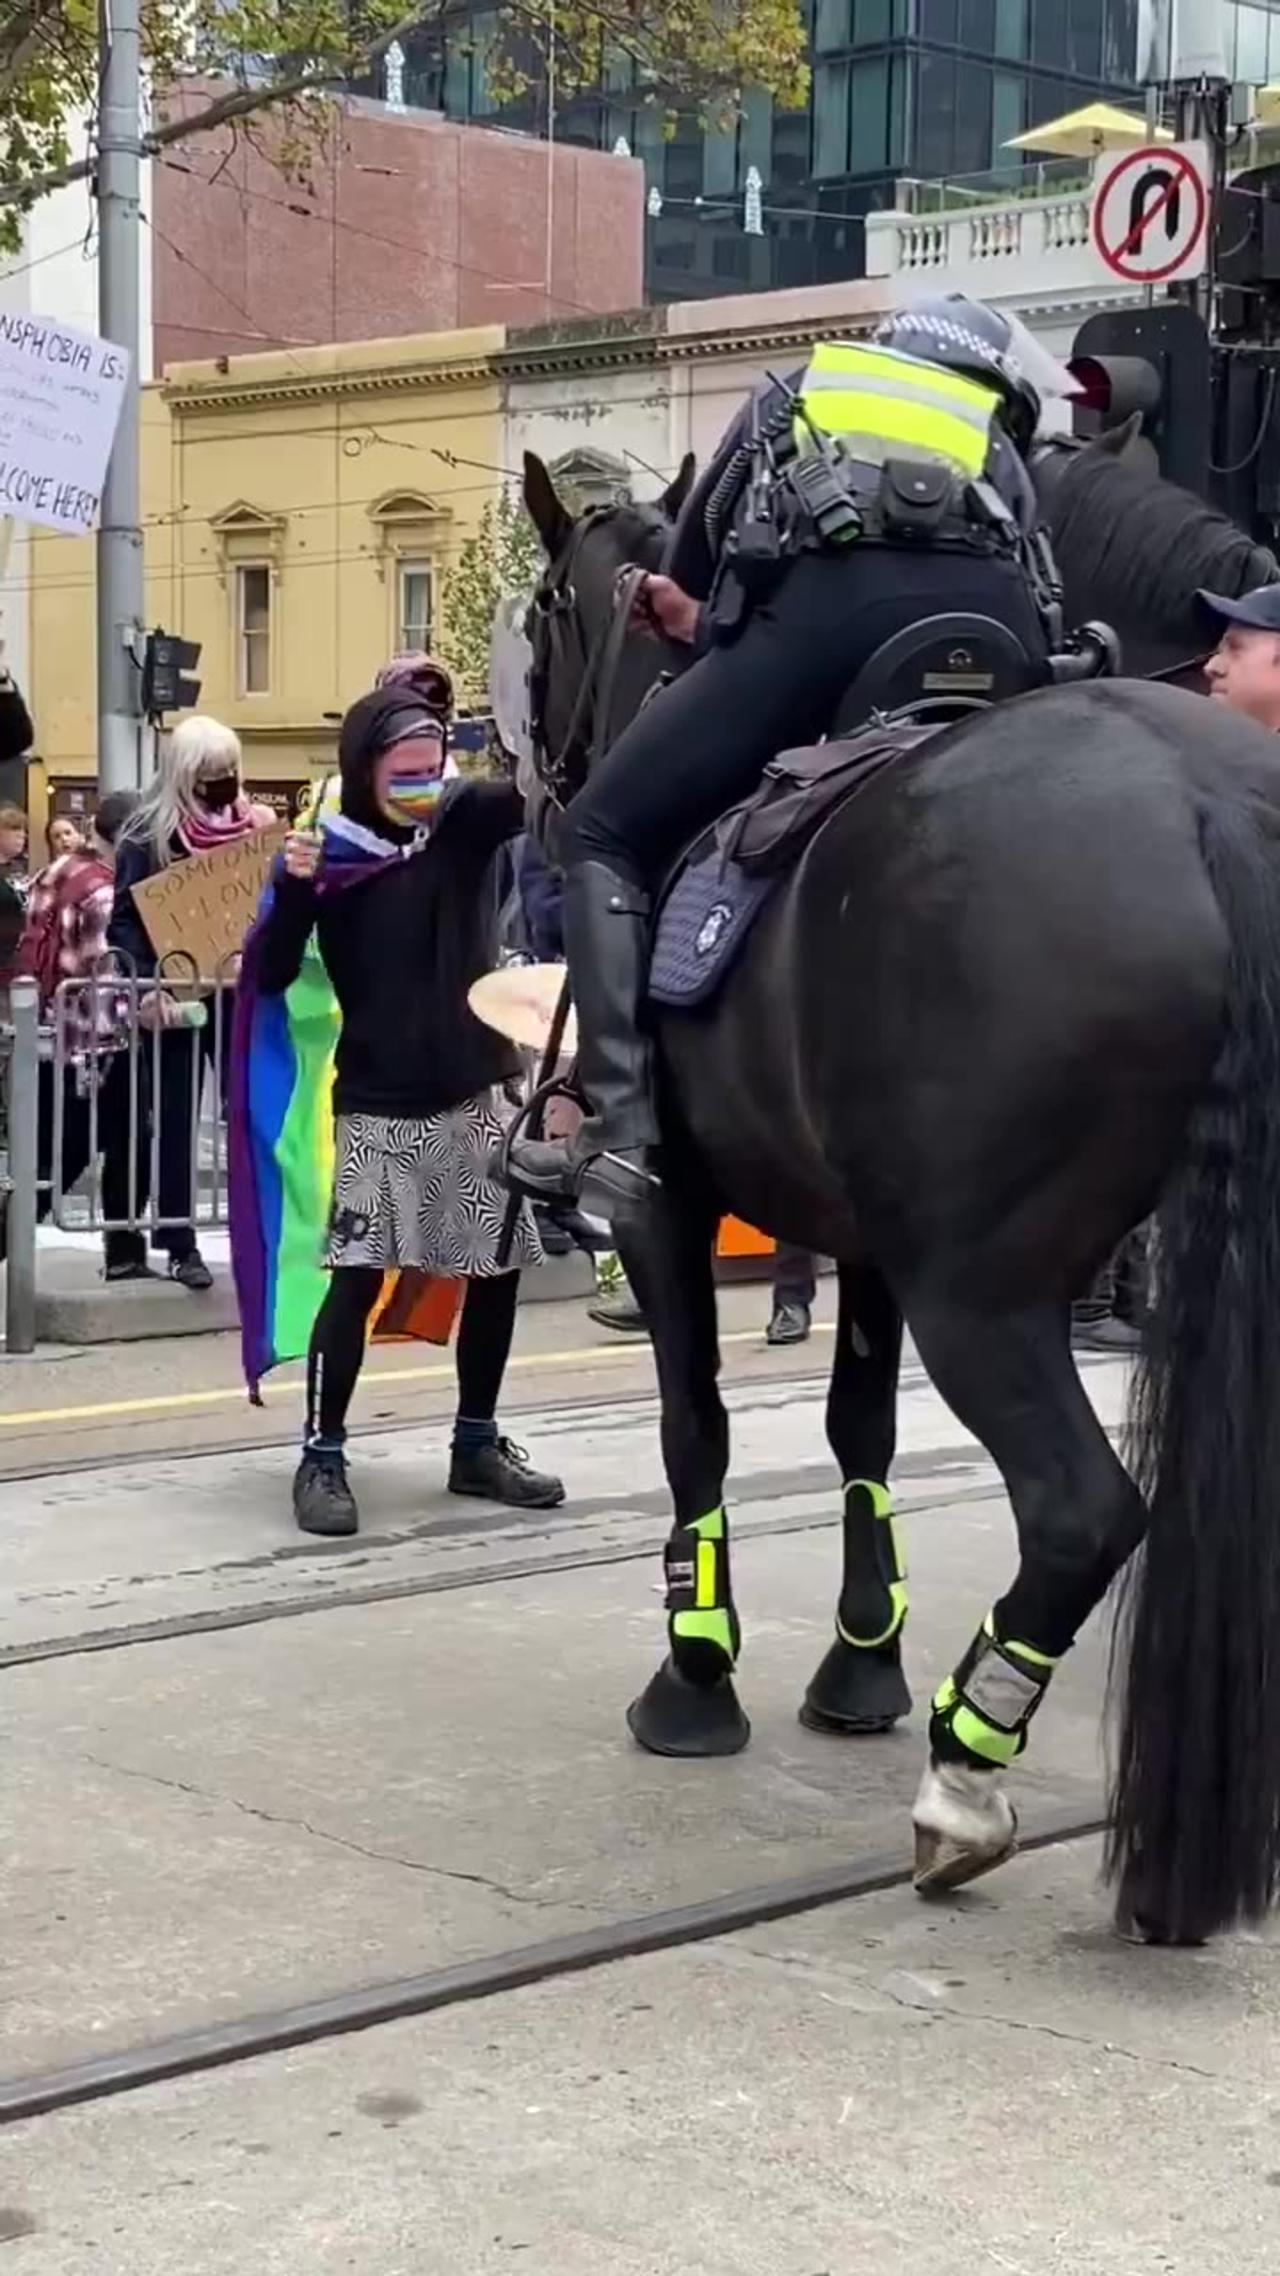 Nut job wearing LGBTQ flag tries to scare horse